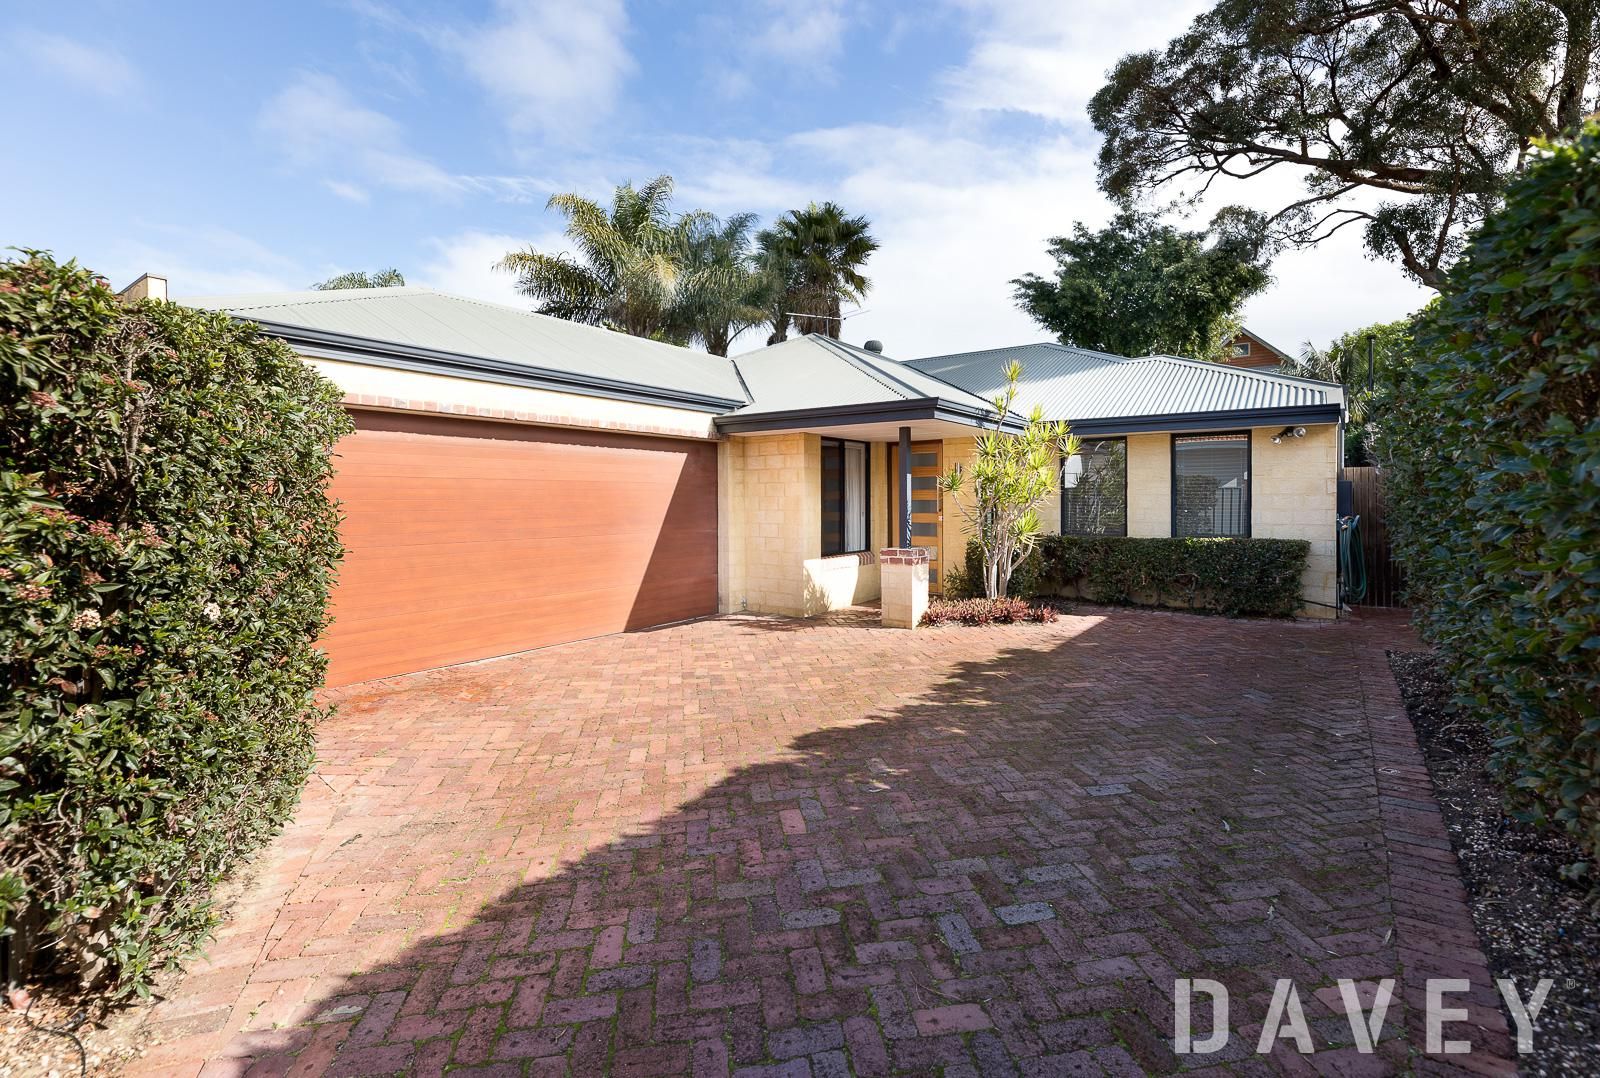 3 bedrooms Duplex in 175A Wilding St DOUBLEVIEW WA, 6018